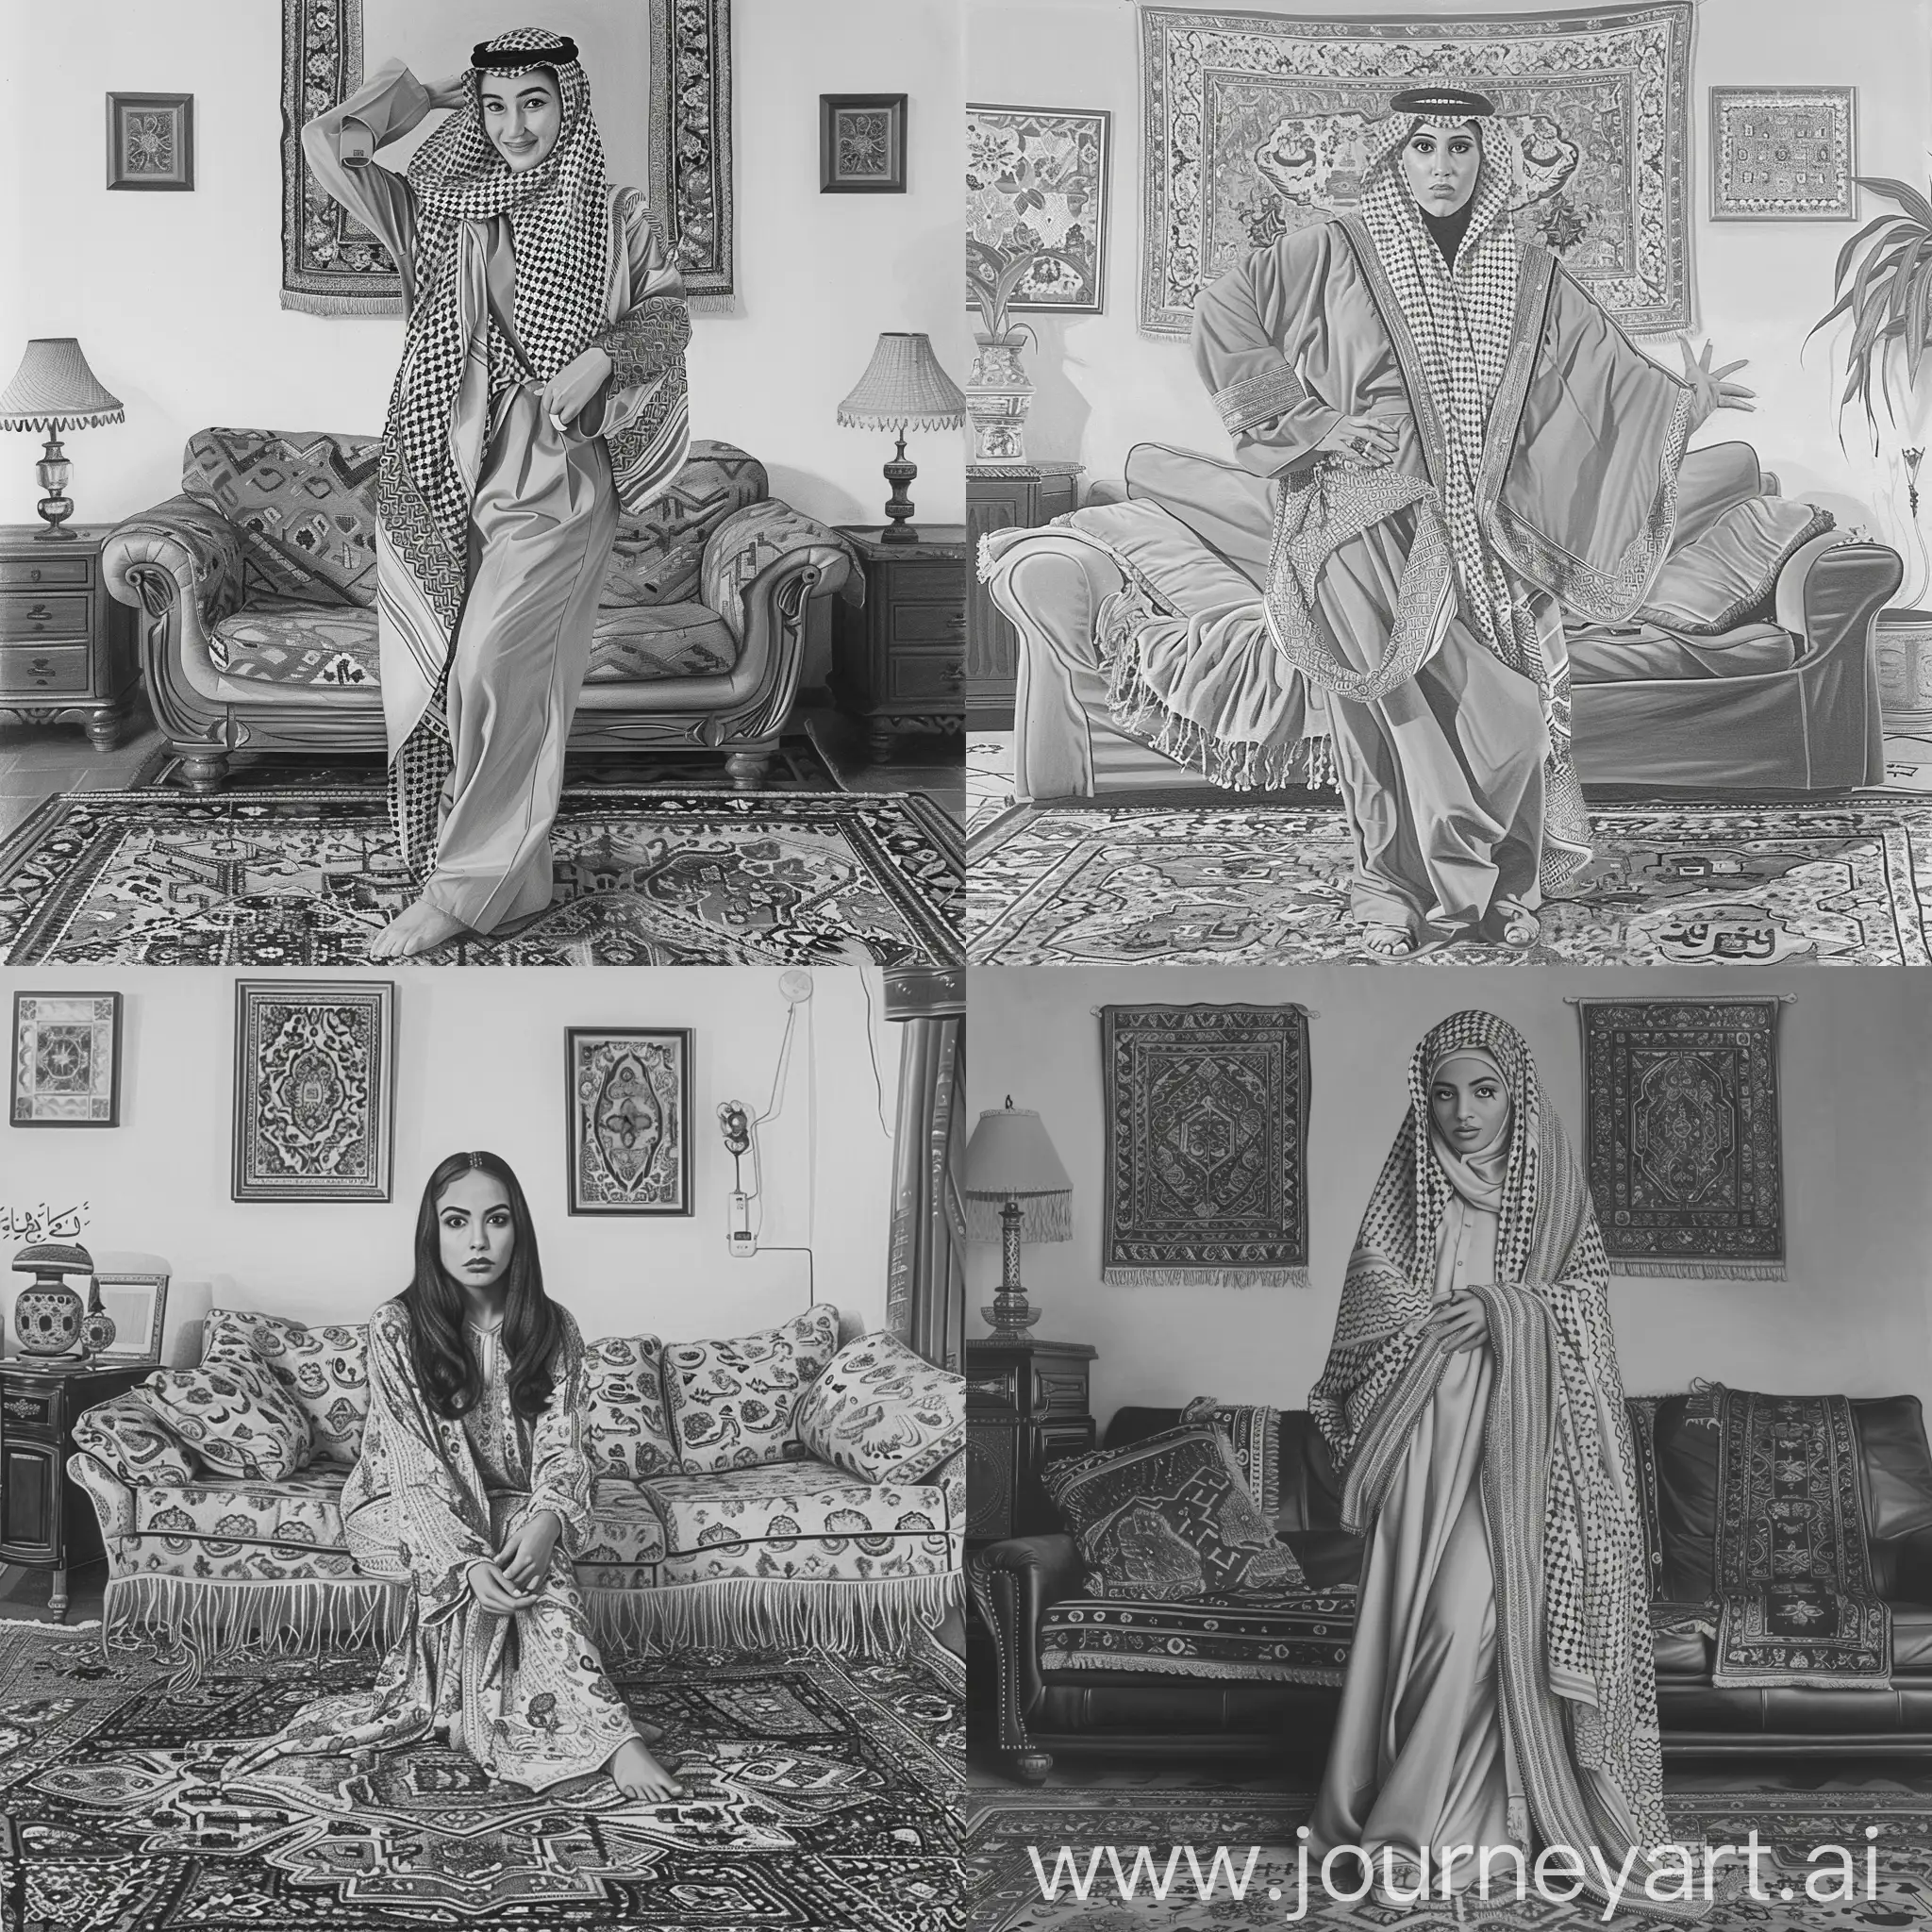 Saudi-Woman-in-80s-Iranian-Living-Room-Hilarious-Pose-in-Black-and-White-Portrait